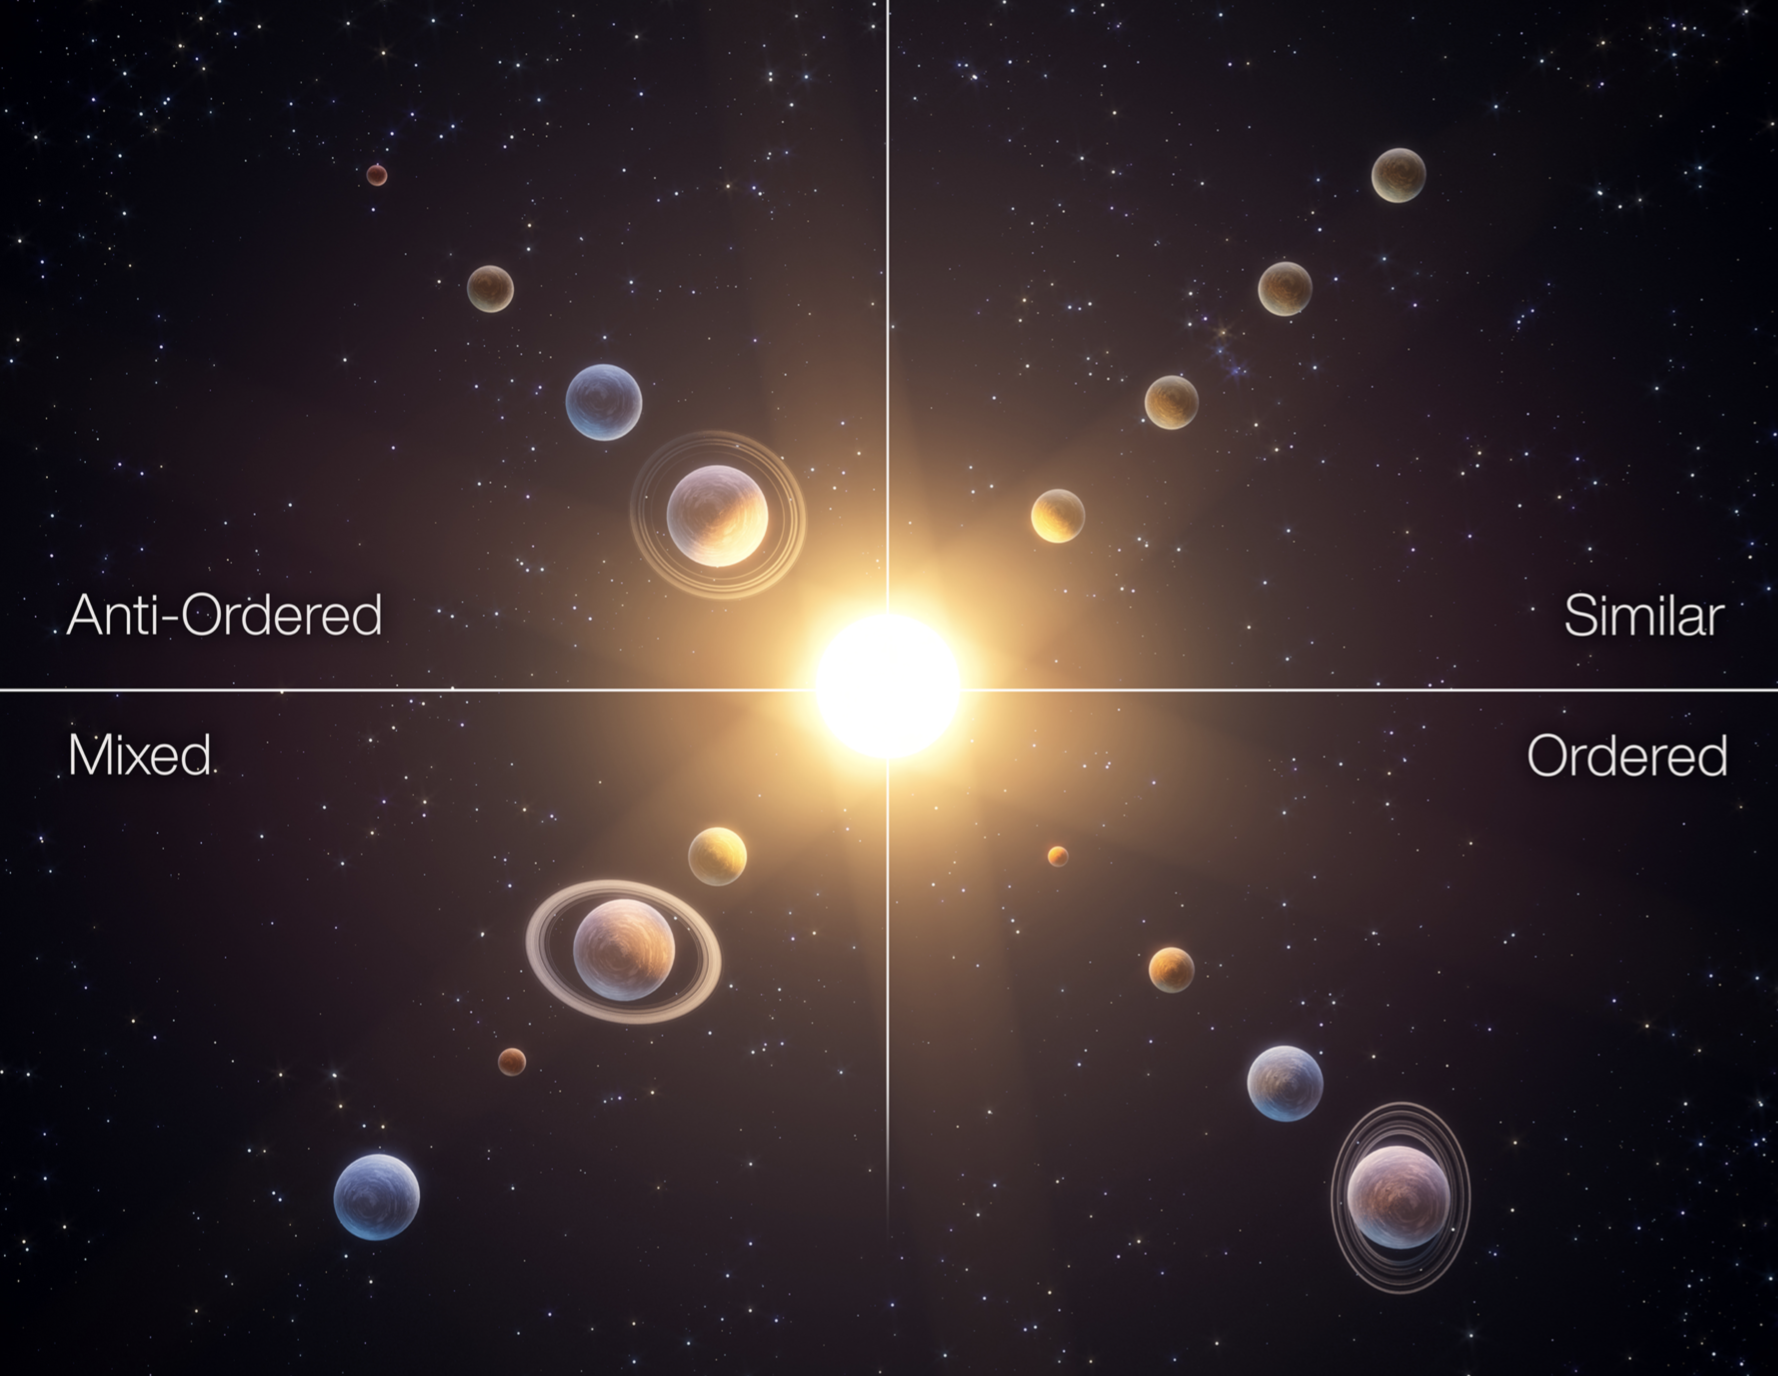 Science Matters: Solar System: The Planets to Scale